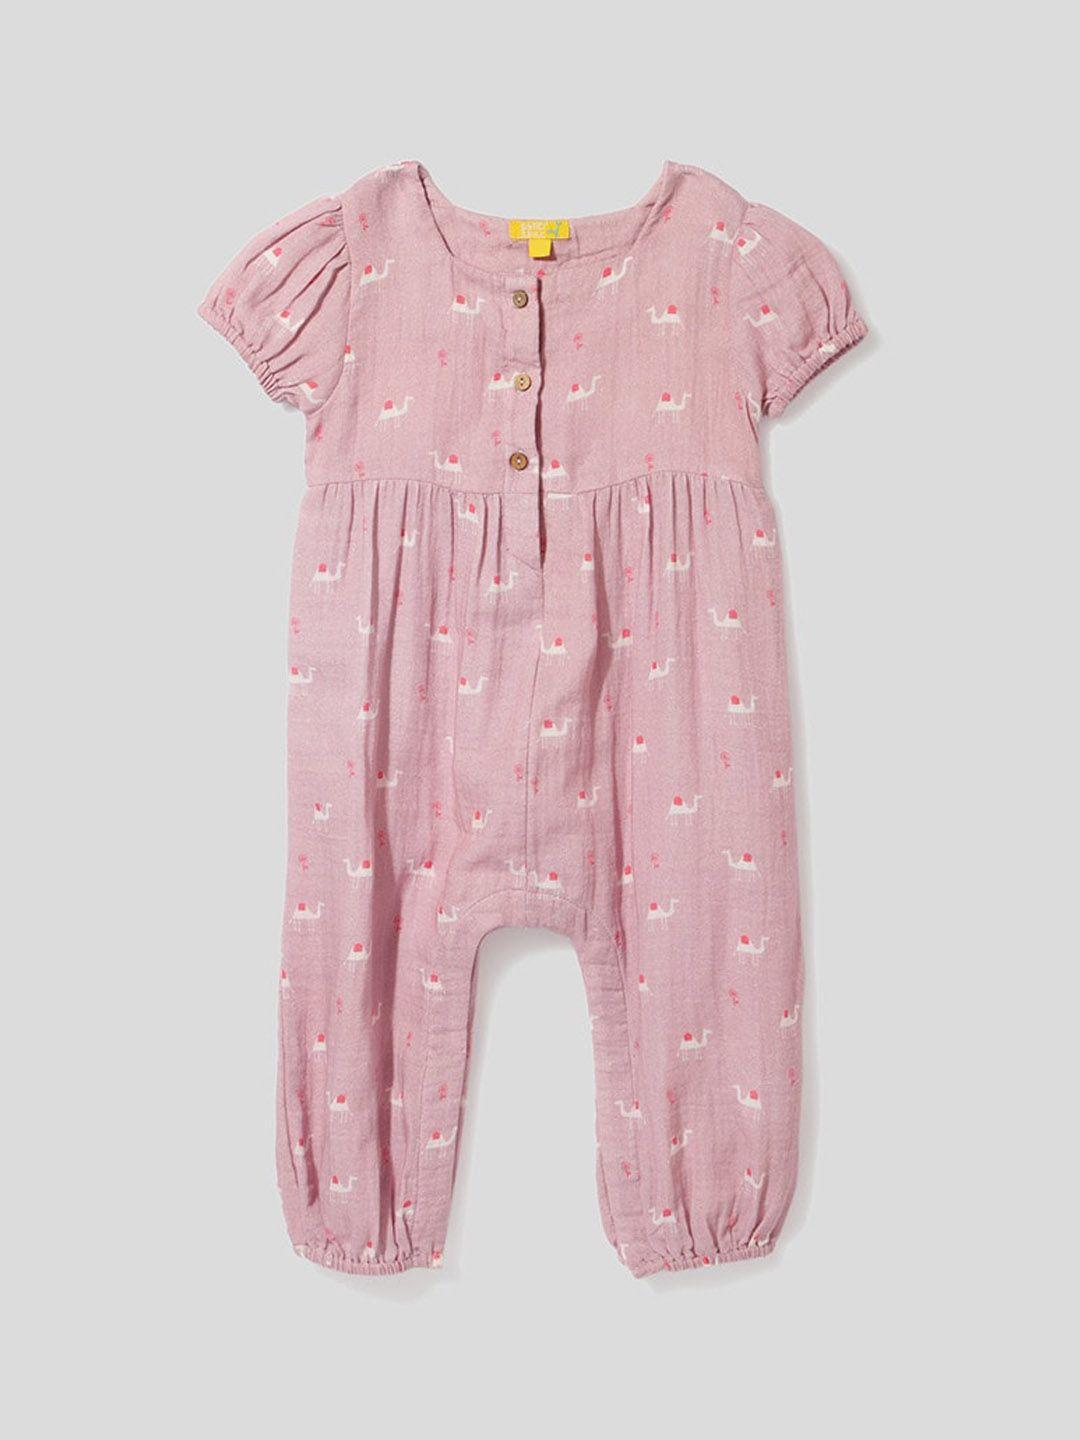 somersault-infants-girls-printed-pure-cotton-rompers